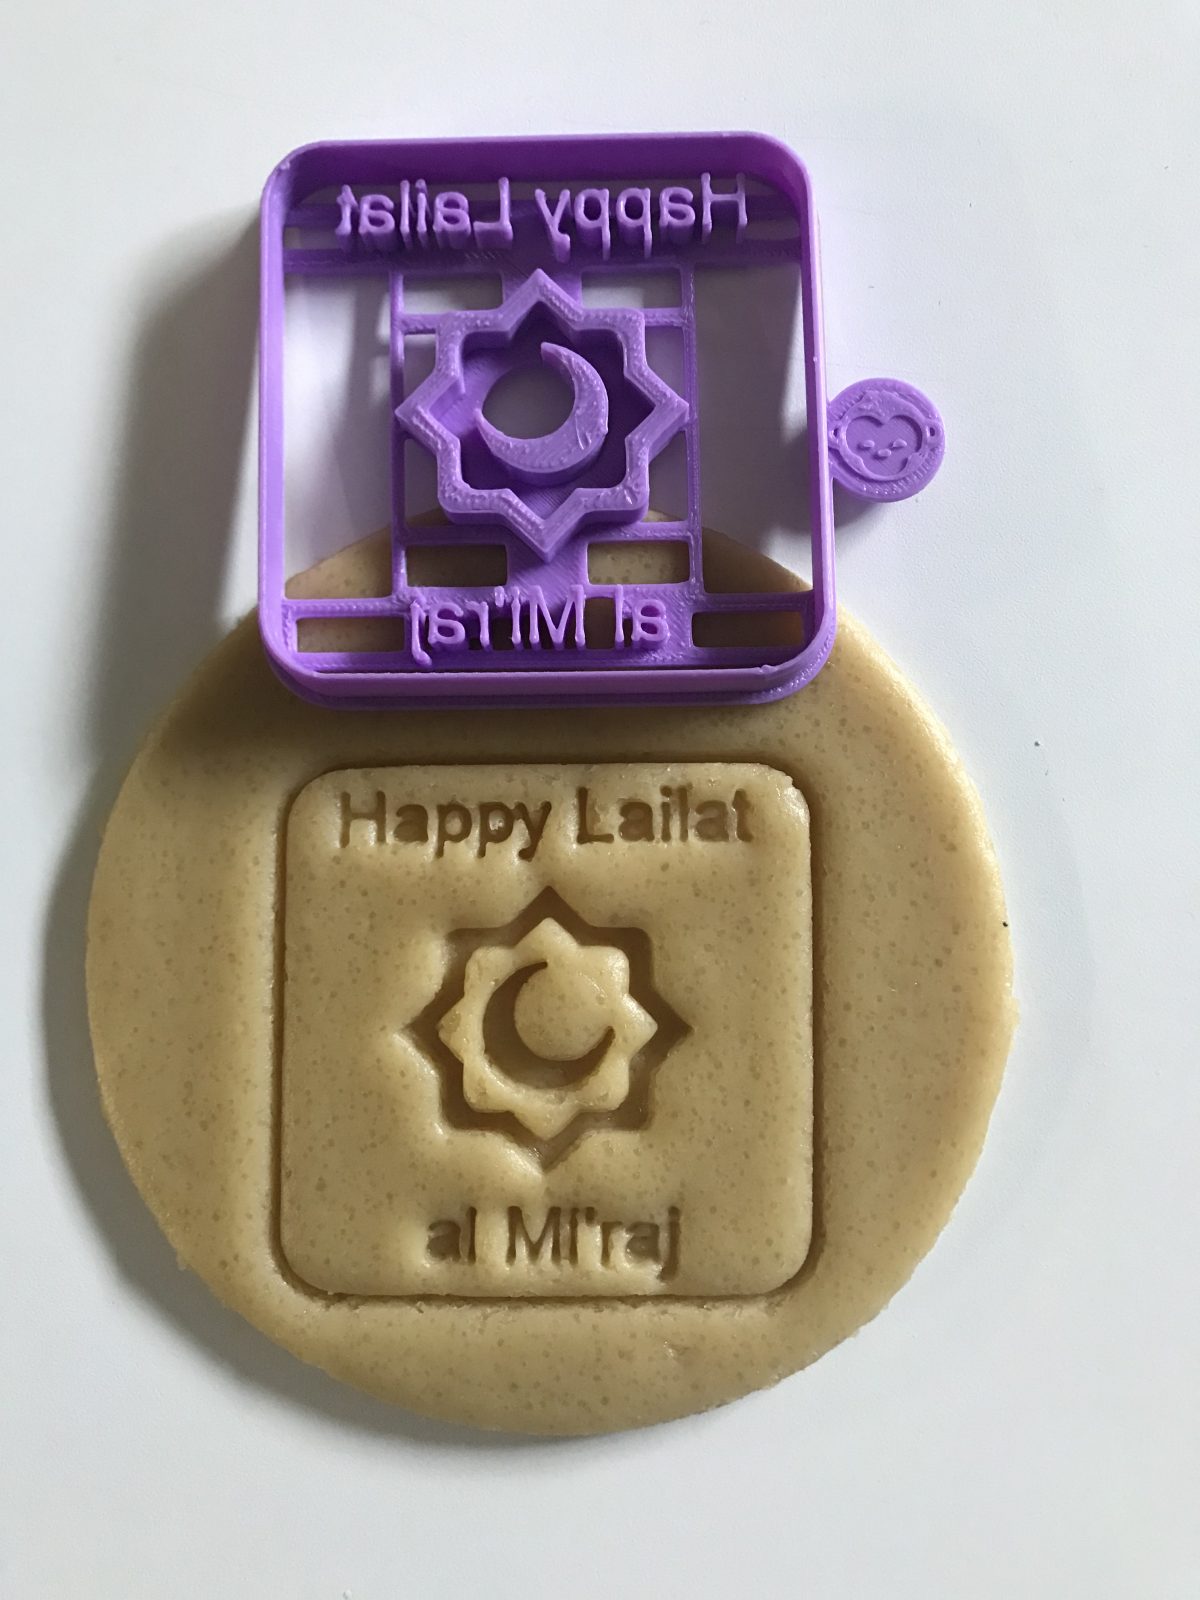 Happy Lailat Cookie Cutter